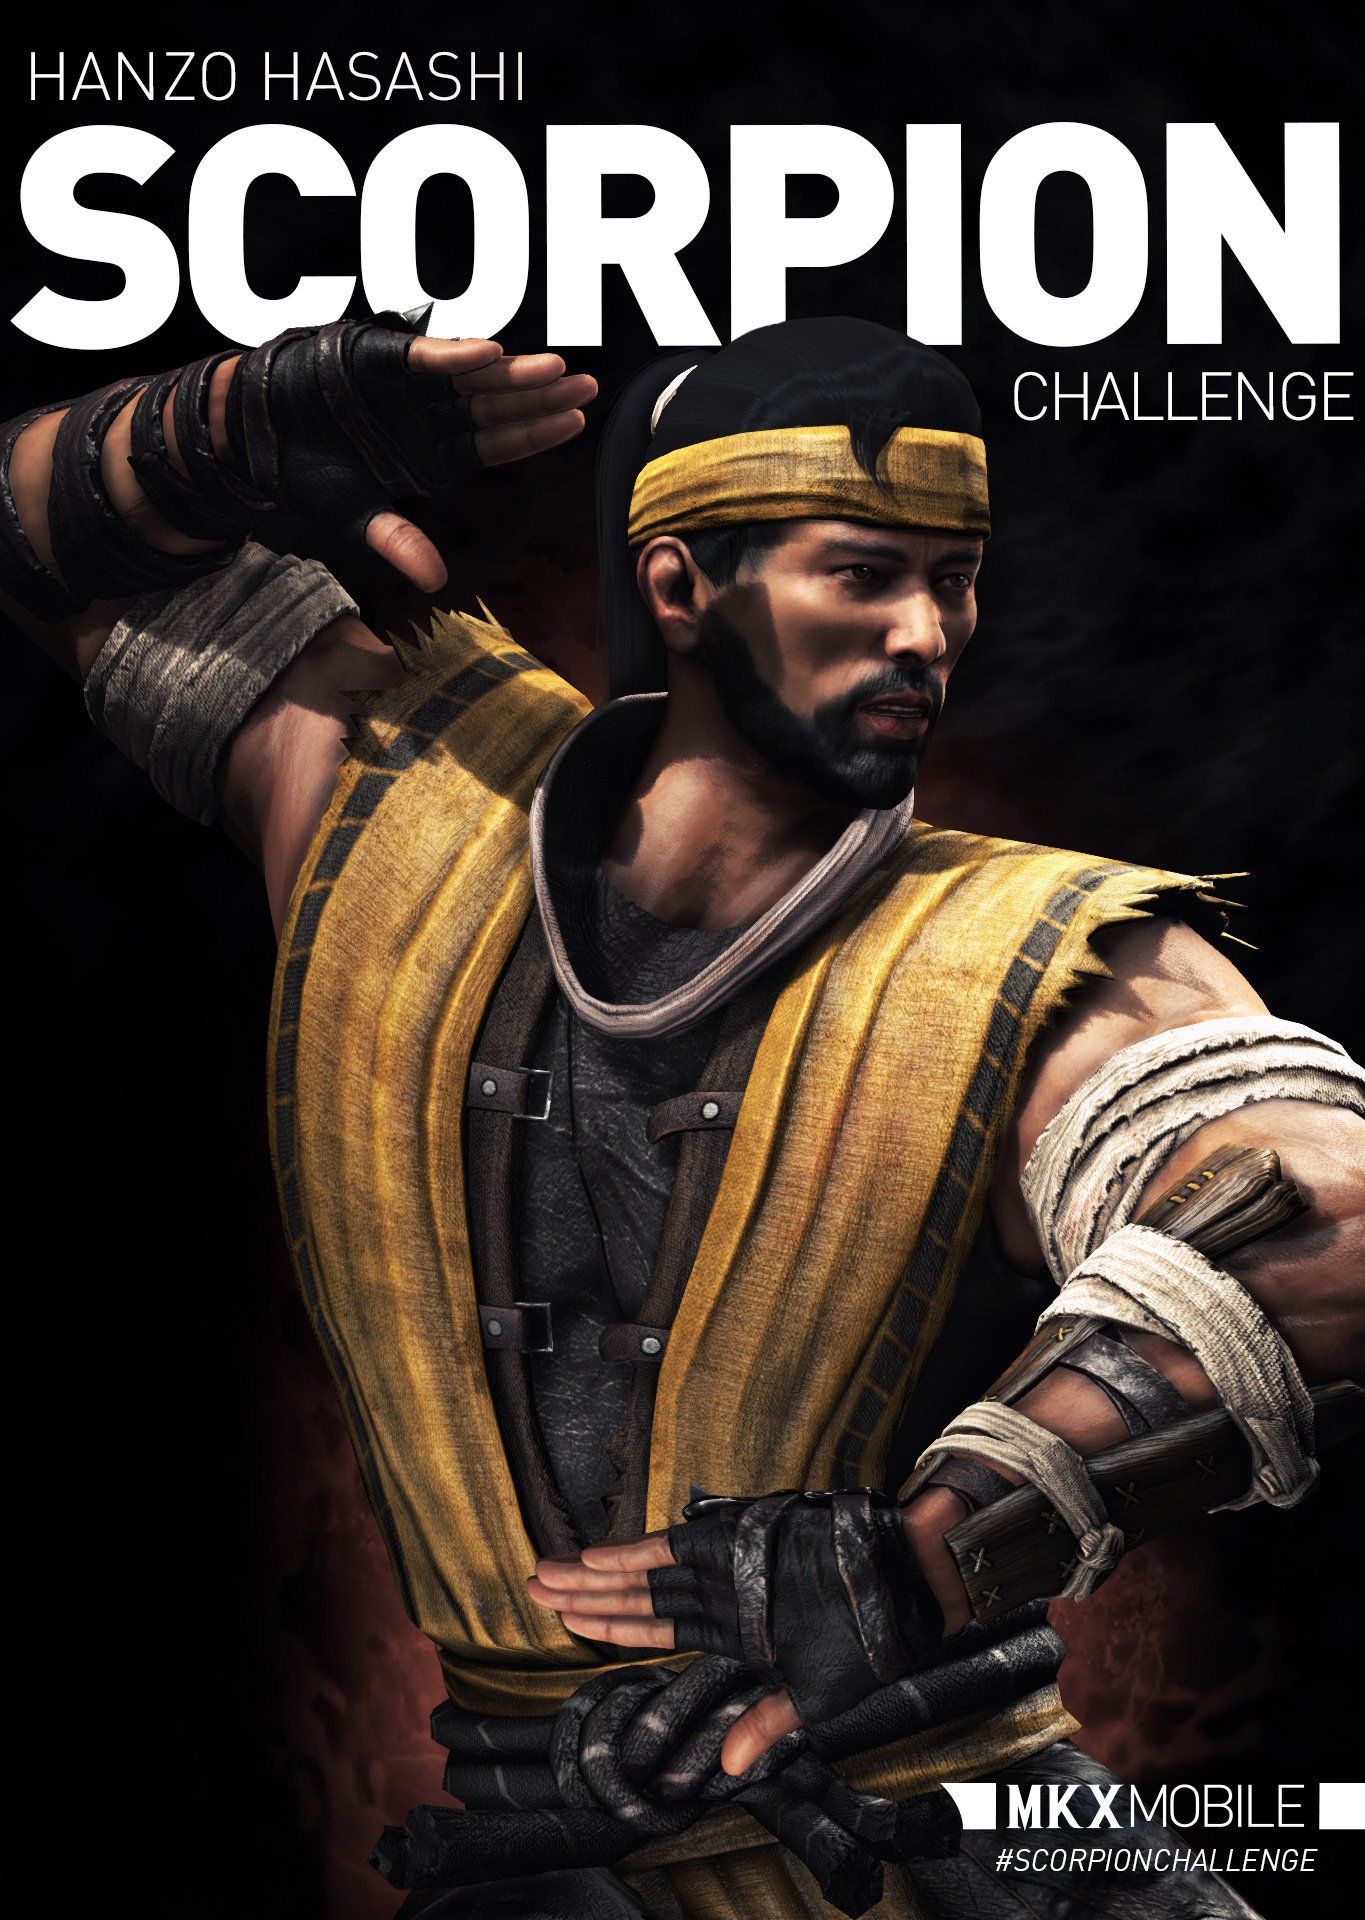 Mortal Kombat 11 Ultimate Hanzo Hasashi Scorpion Challenge is unleashed for the first time in #MKXMobile! Fight!